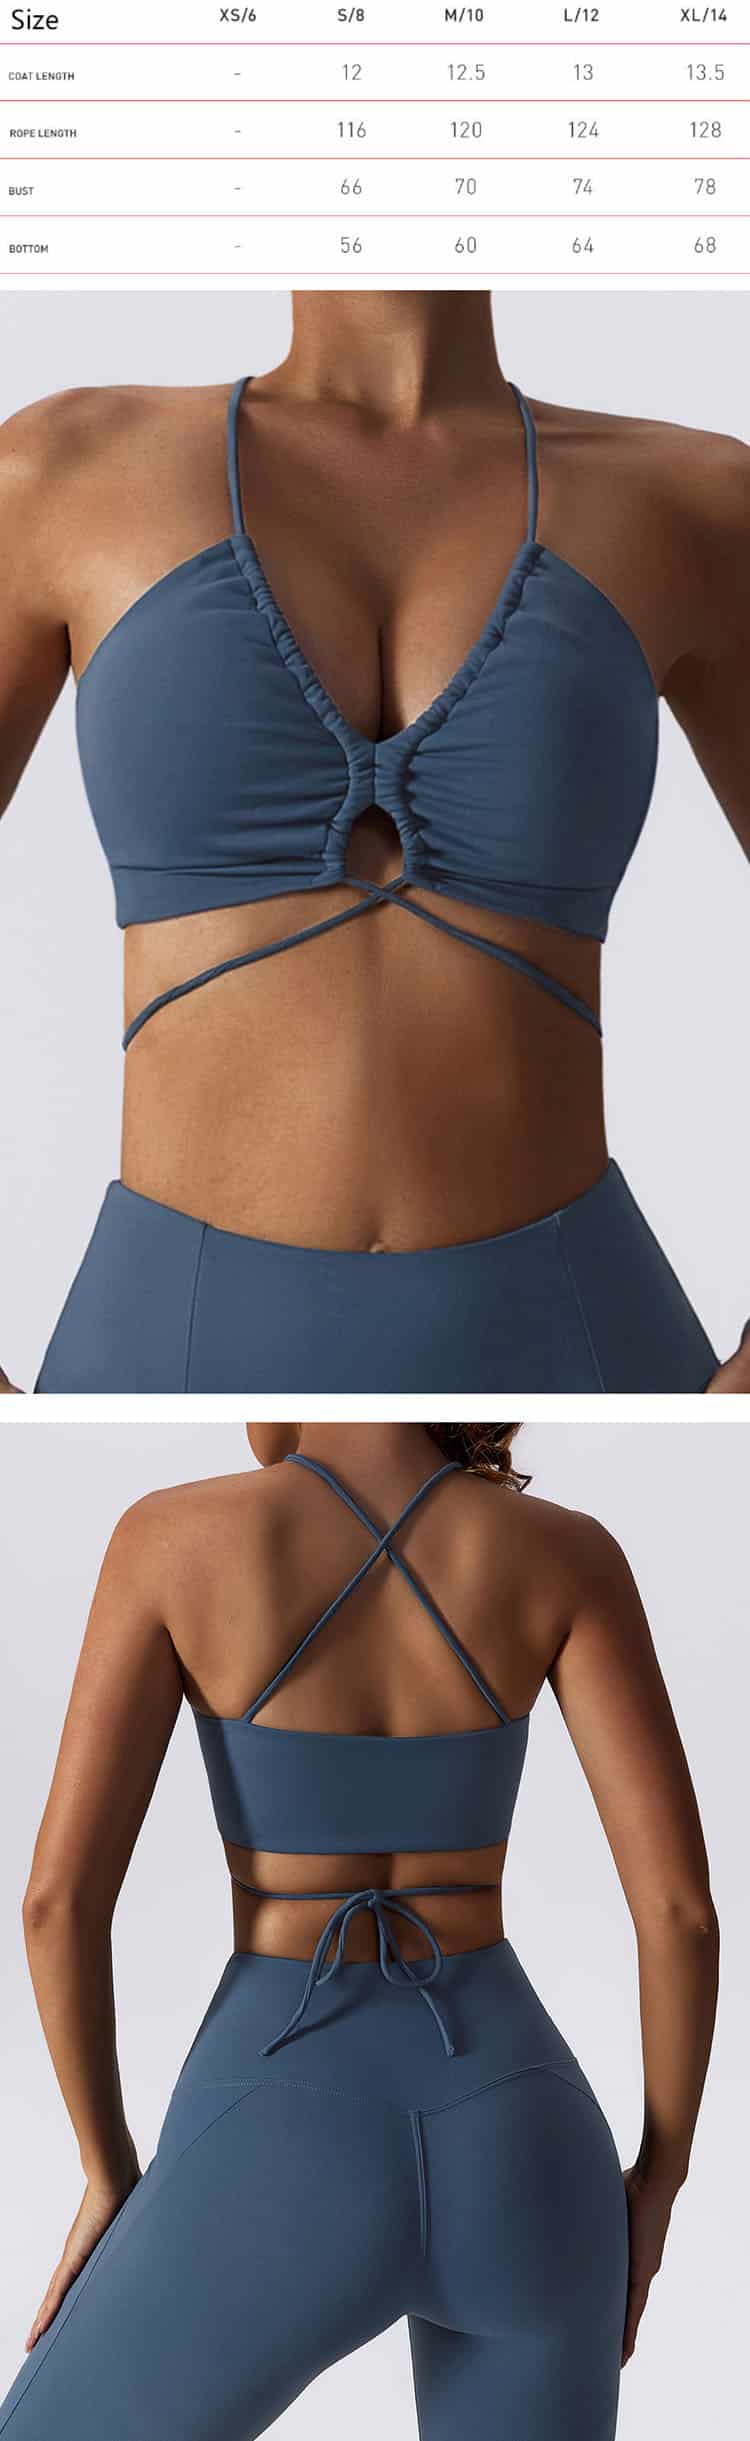 Sports bra for large bust focus the design on the front and middle design